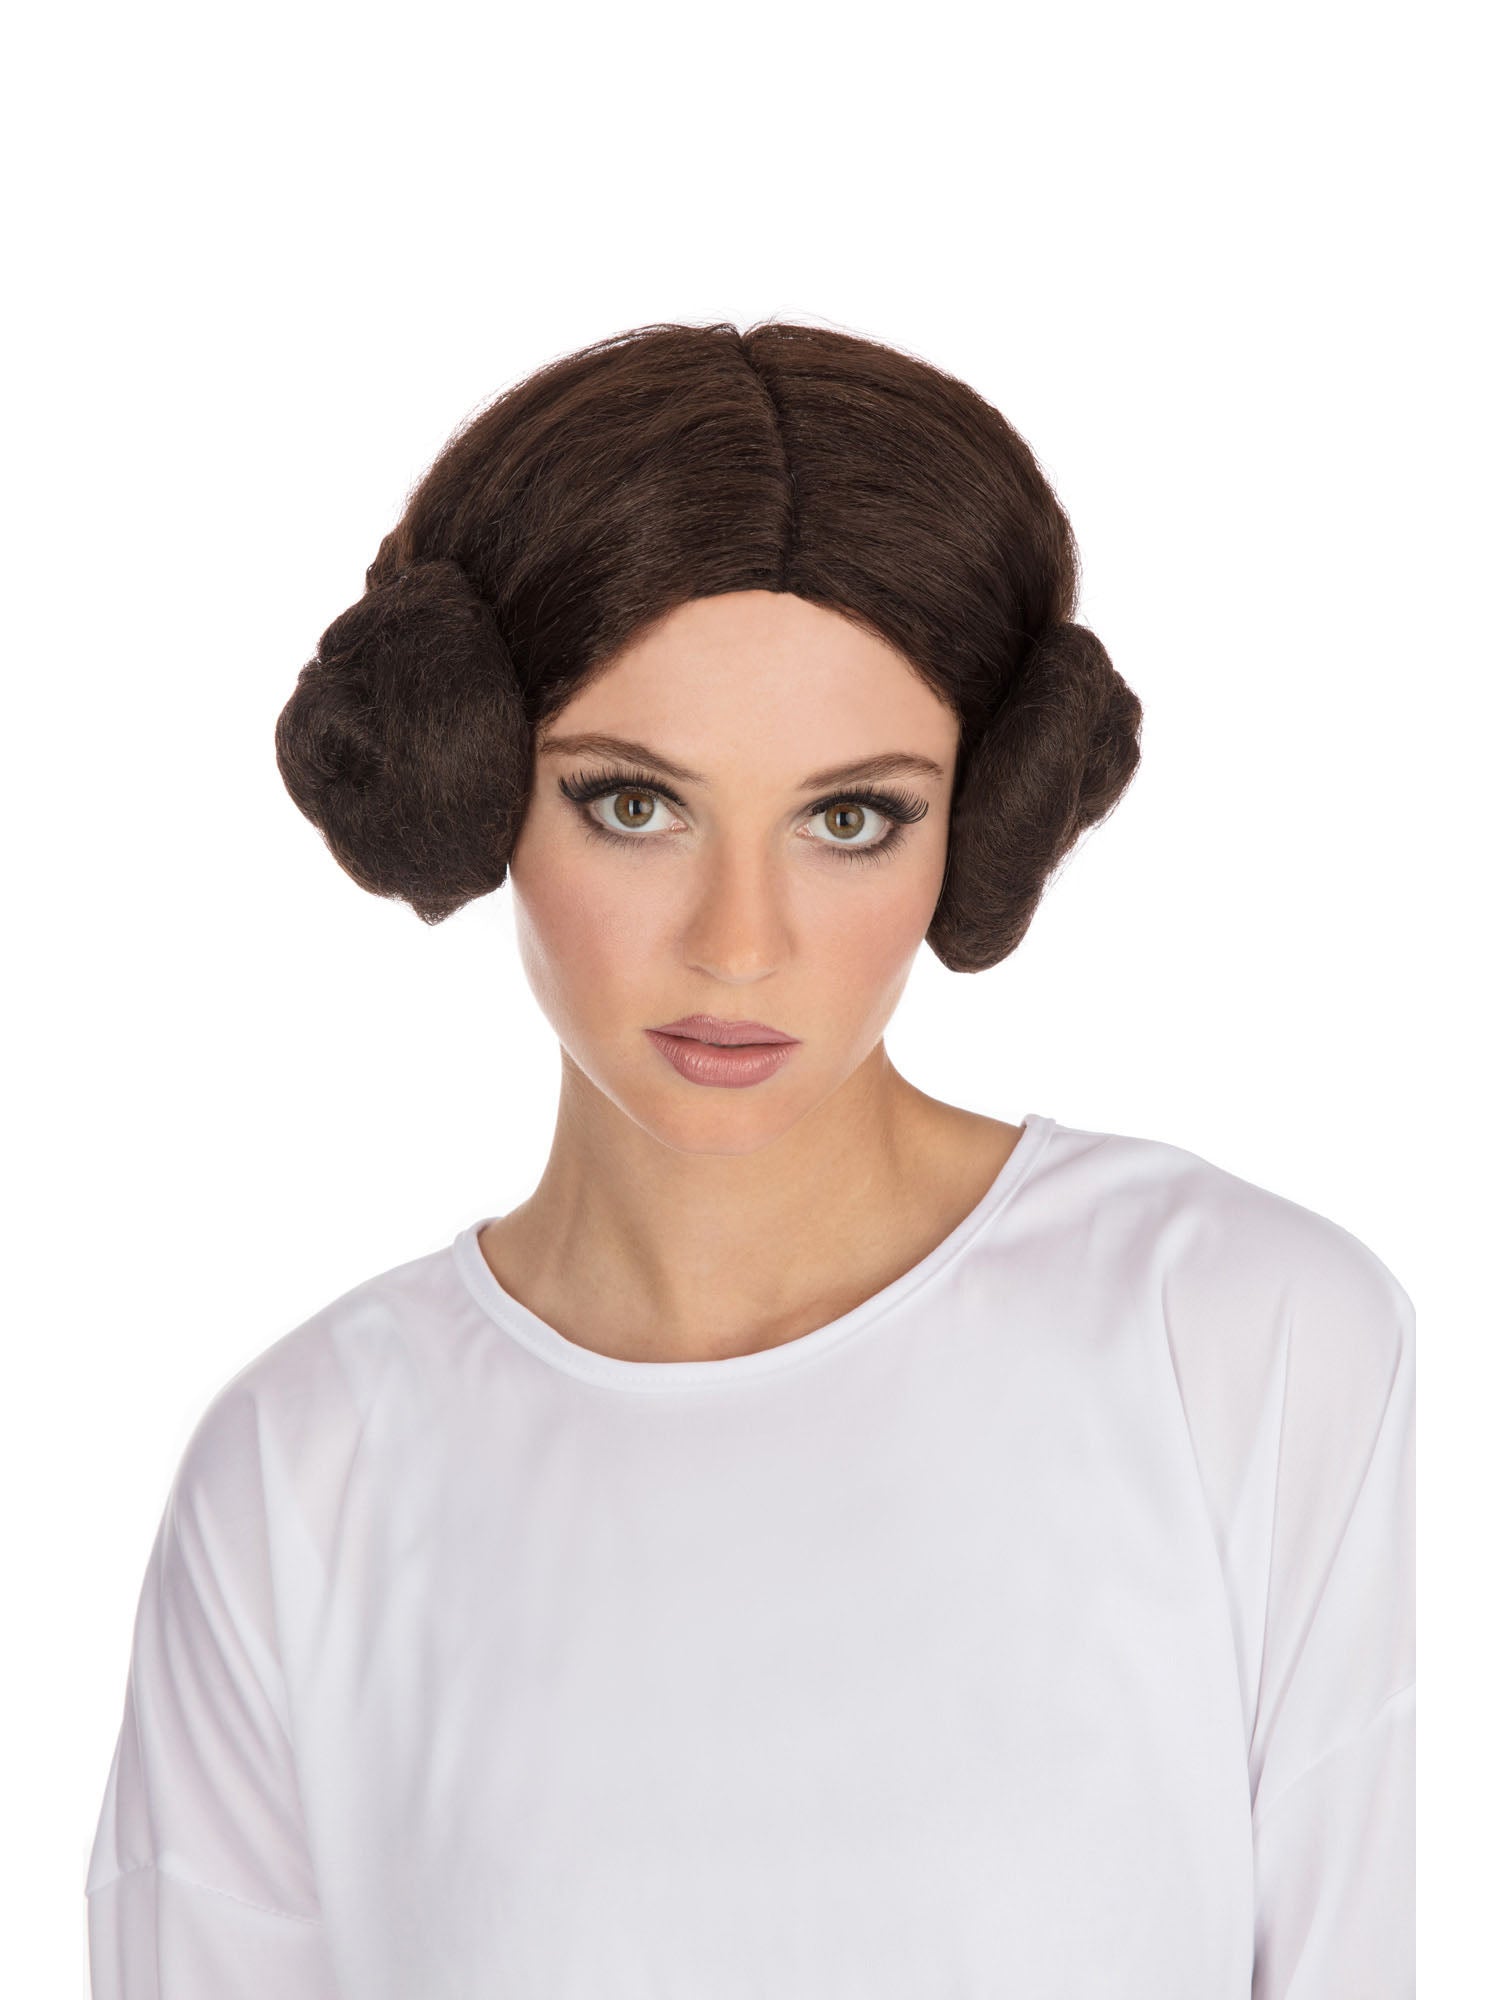 Space Princess, brown, Generic, Wig, One Size, Front